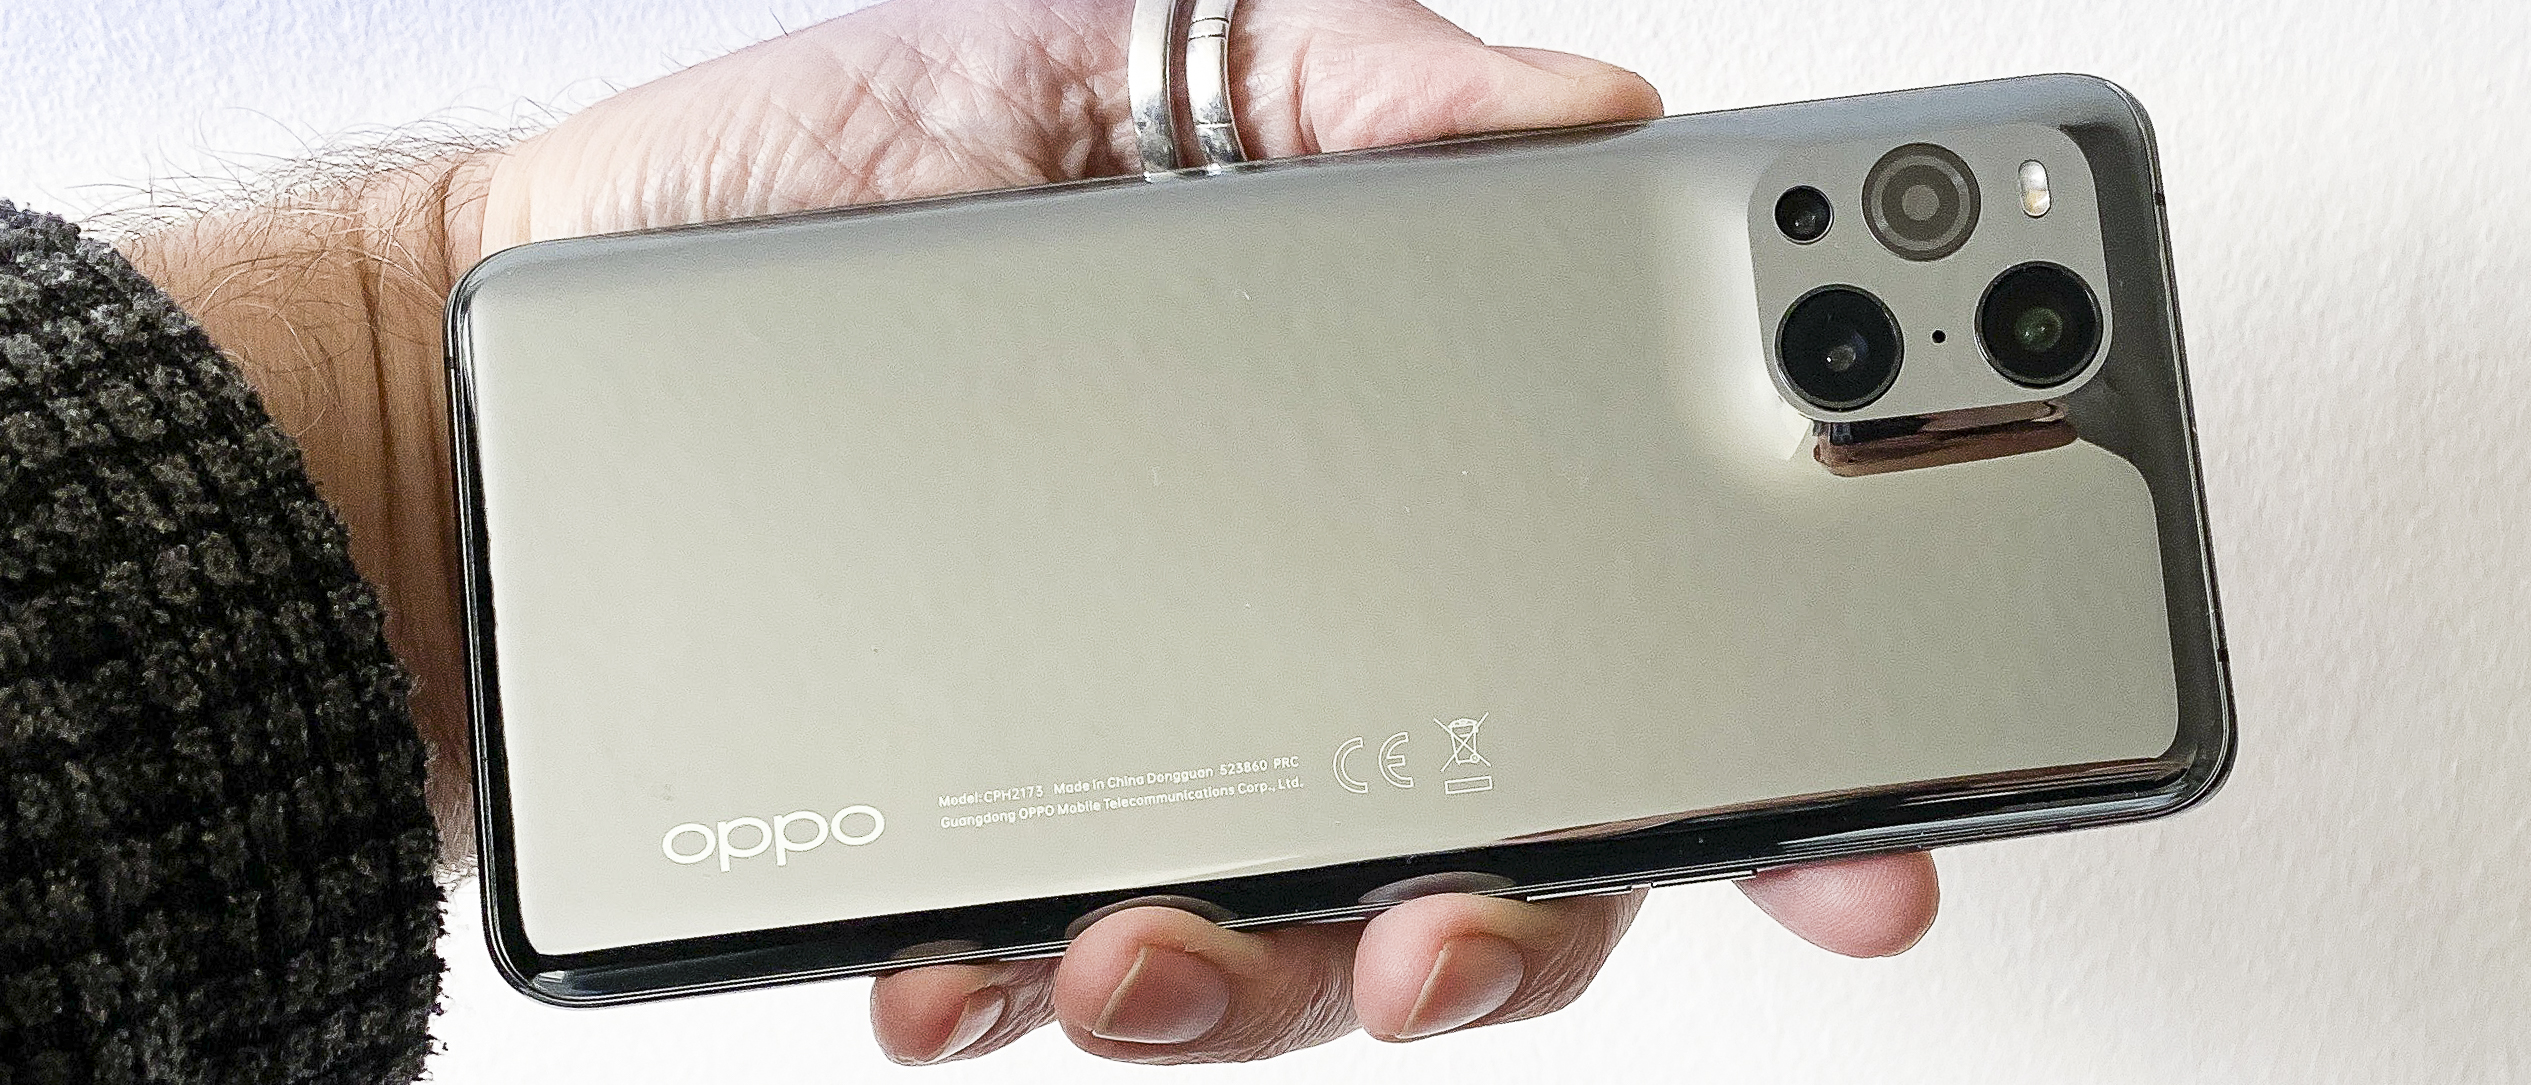 Review: Oppo Find X3 Pro stunning smartphone